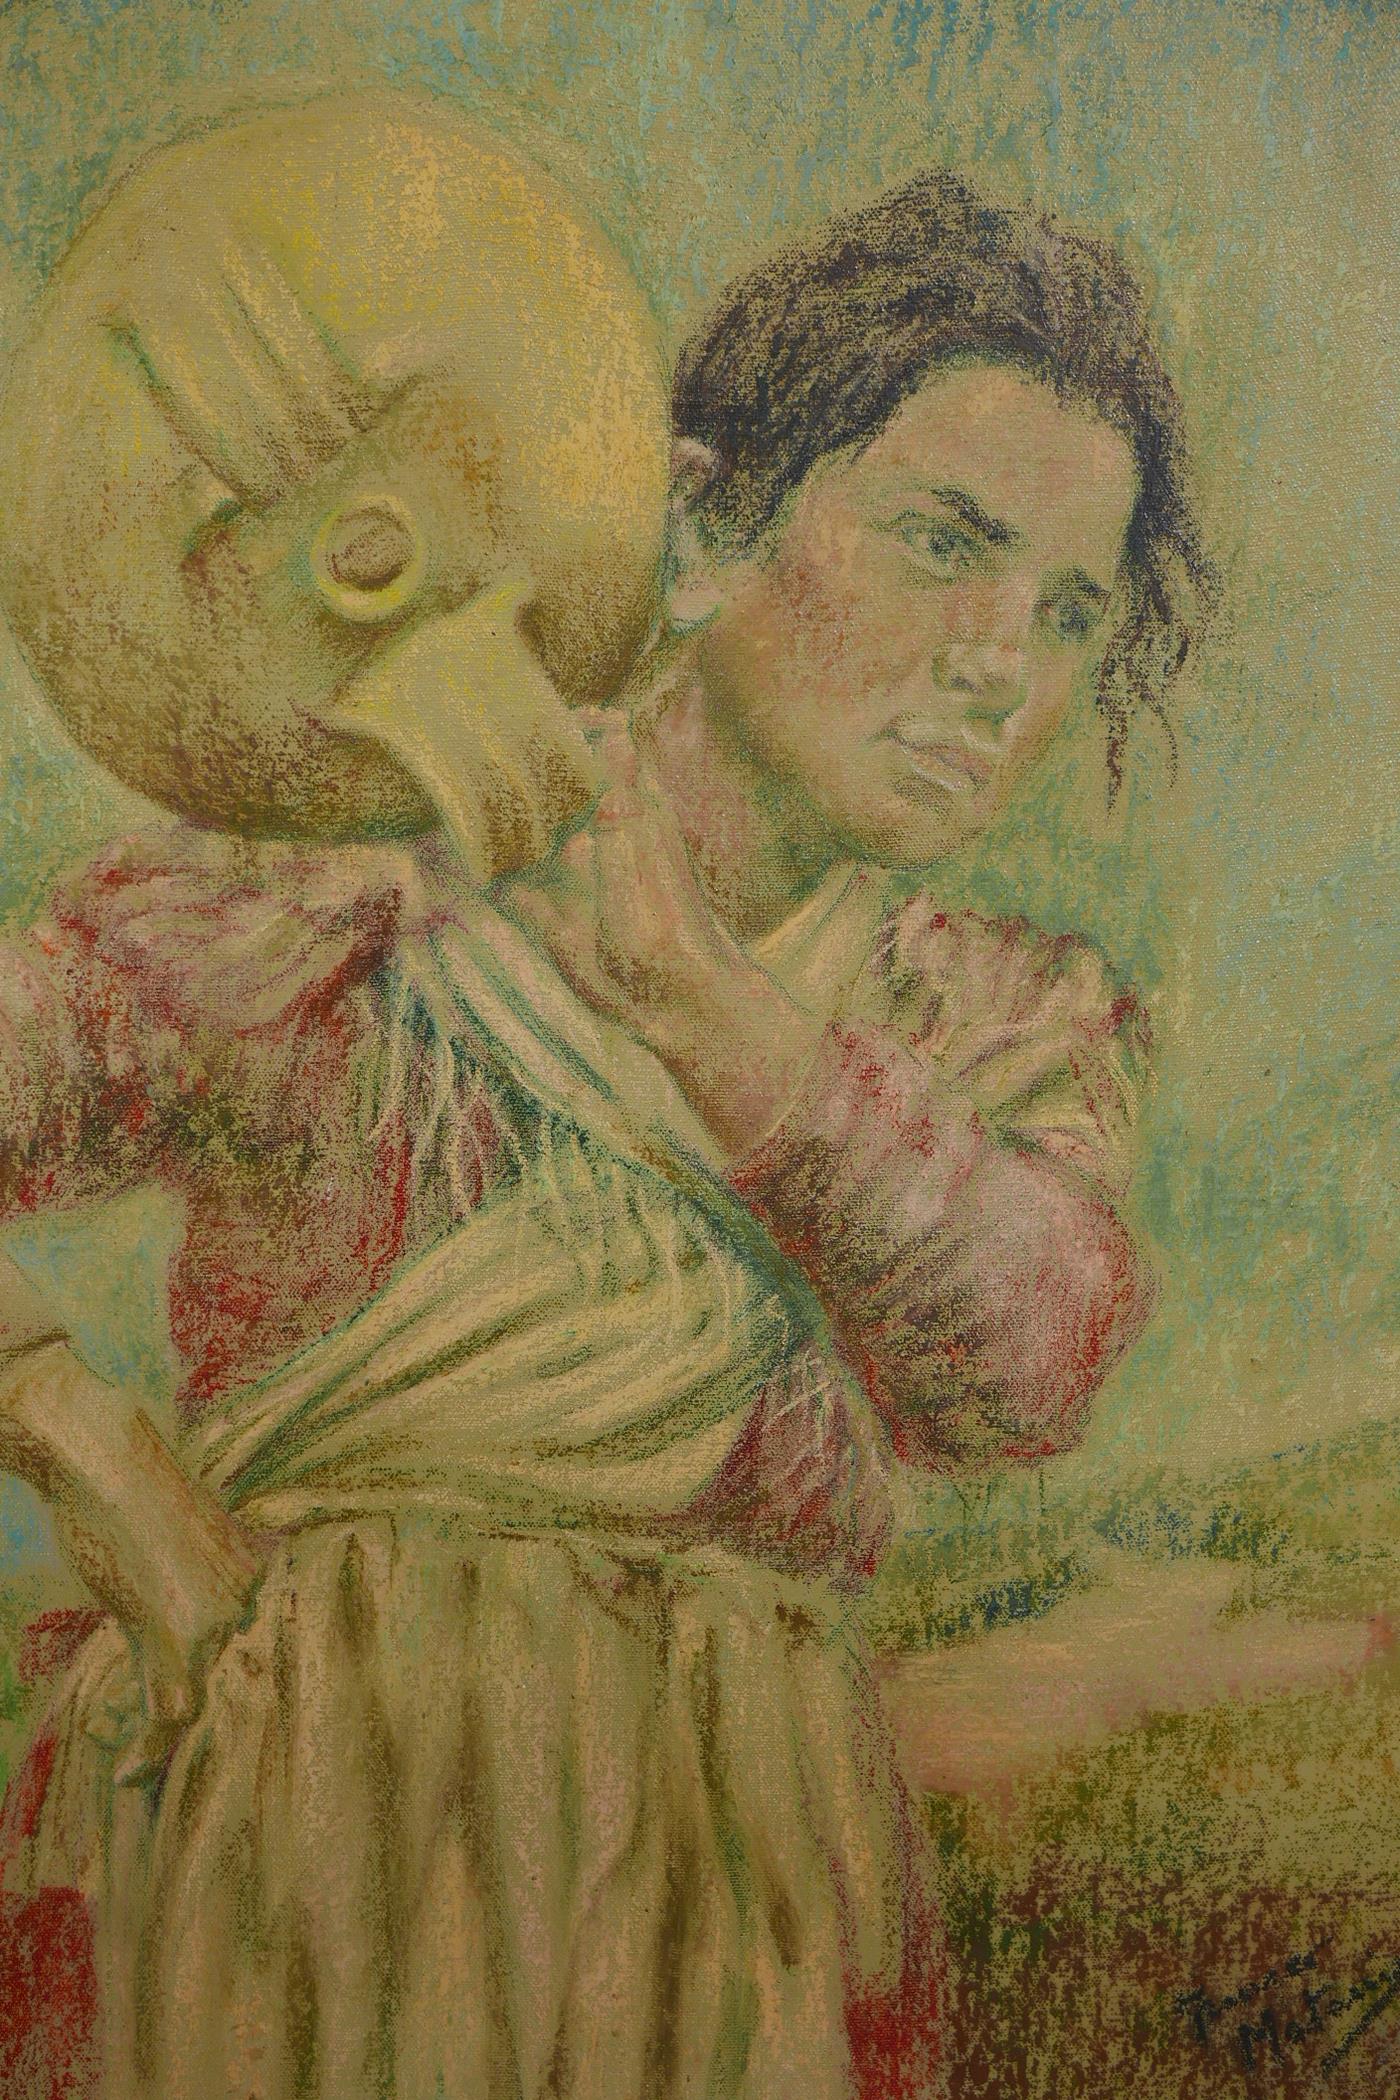 Study of a female carrying an amphora, oil on canvas board, signed indistinctly, 29" x 24"